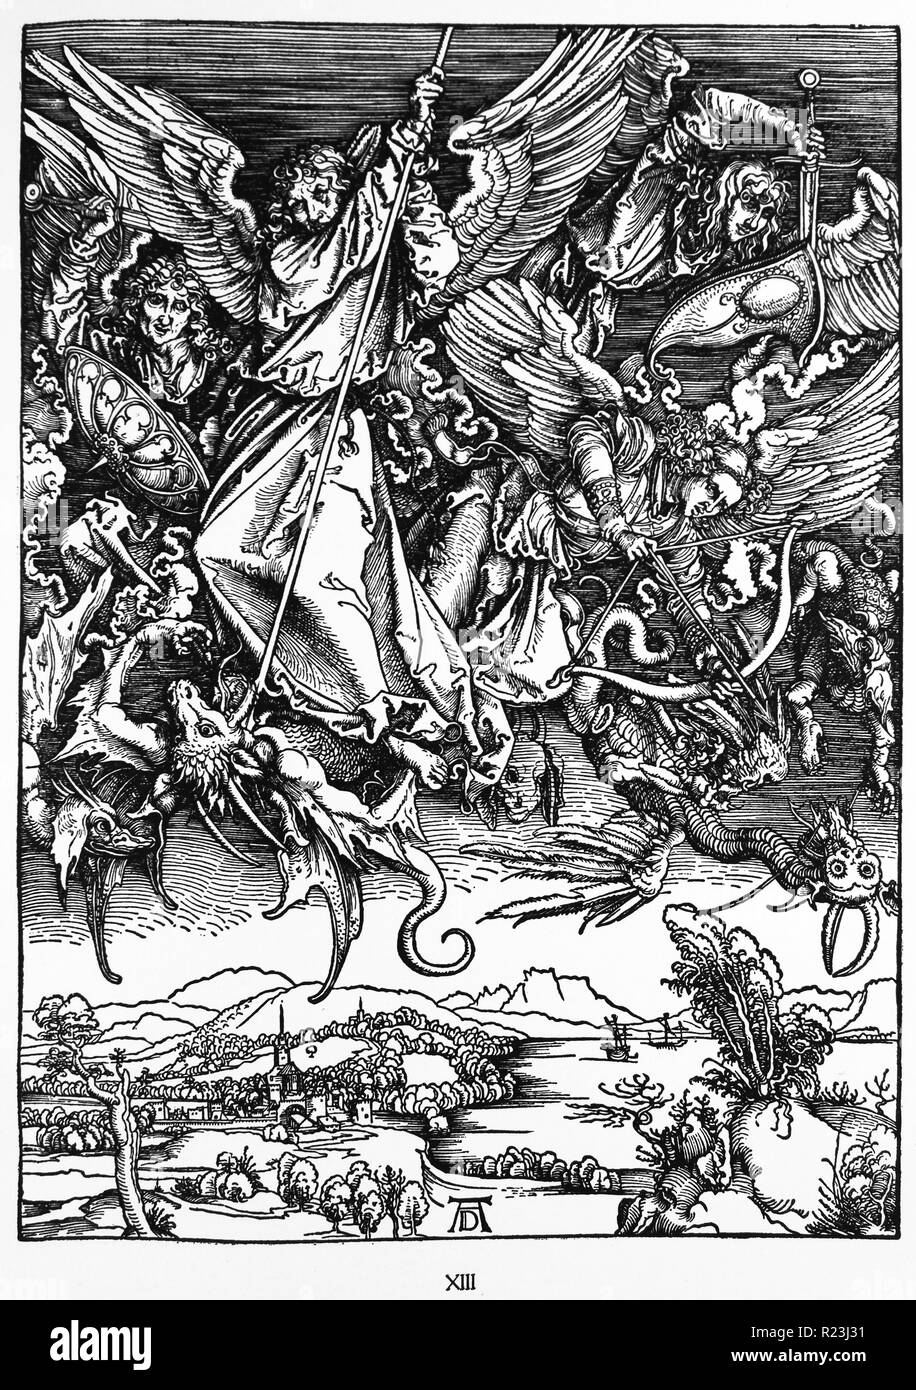 Martin Luther: Preface to the Revelation of John ( 1522): Vorrede zur Offenbarung Johannes (1522). Apocalypse in figures; Woodcut by Albrecht Durer; St. Michael fighting the dragon Stock Photo